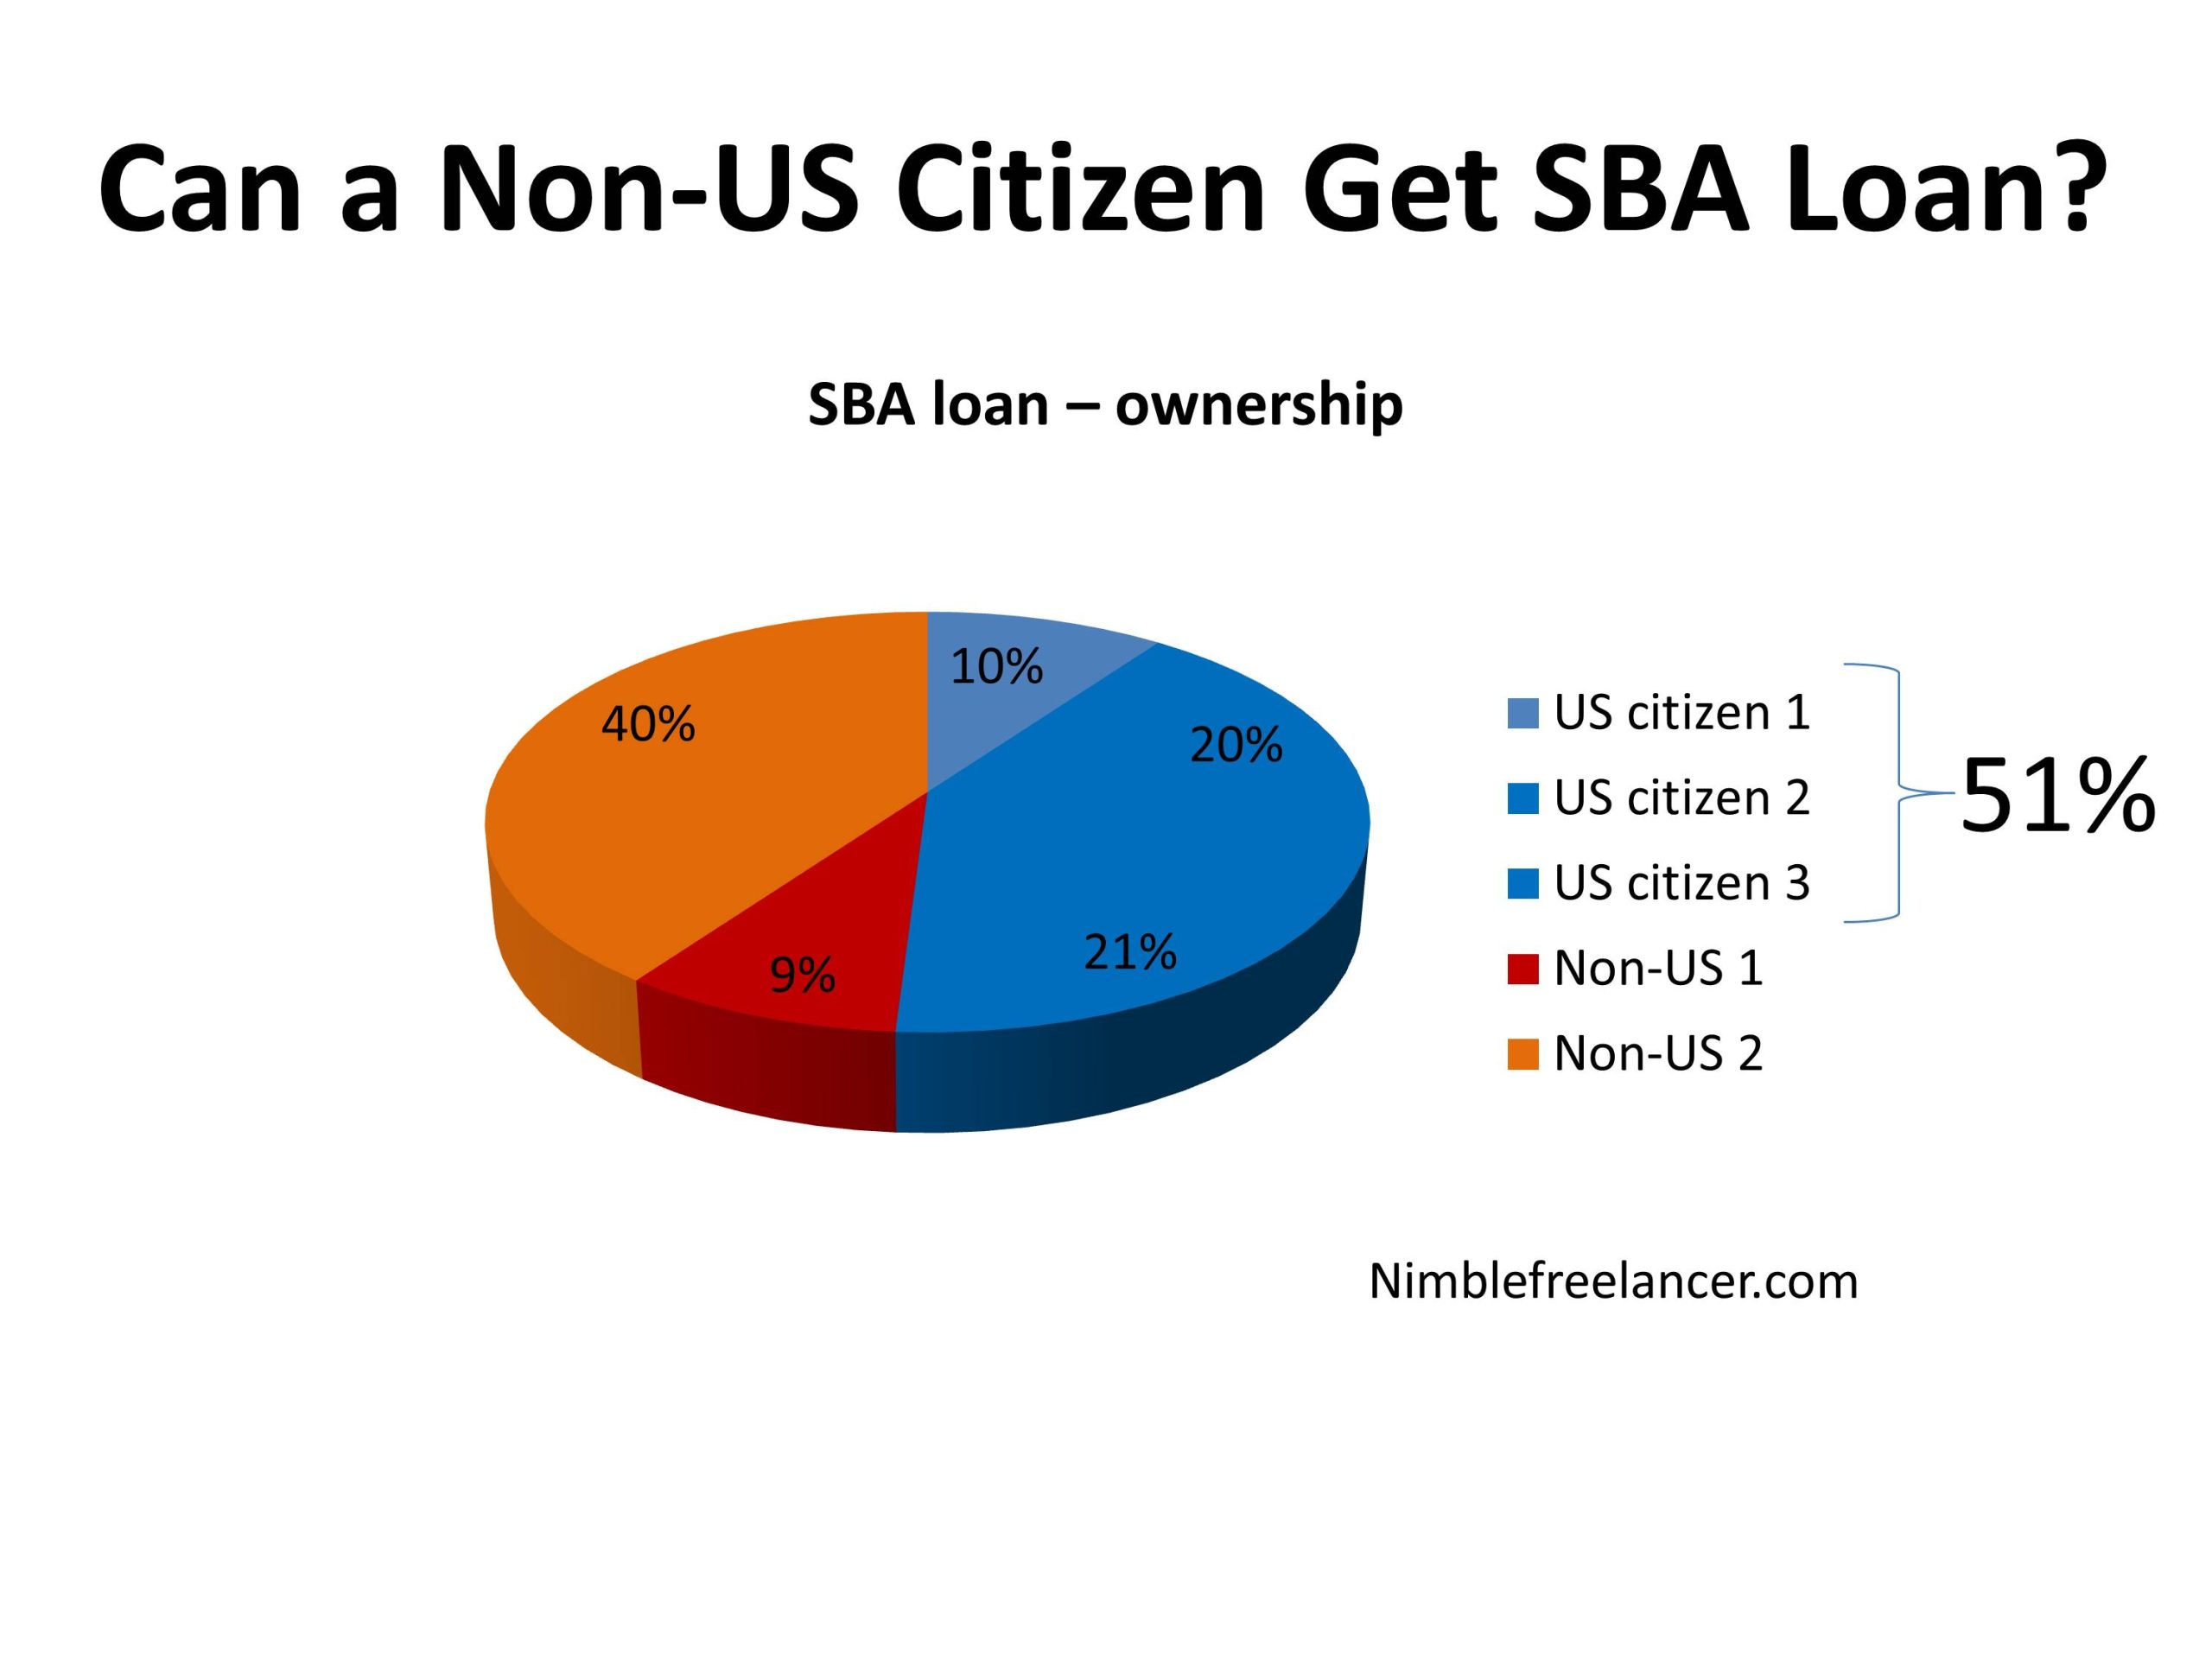 Can a Non-US Citizen Get SBA Loan - percentages